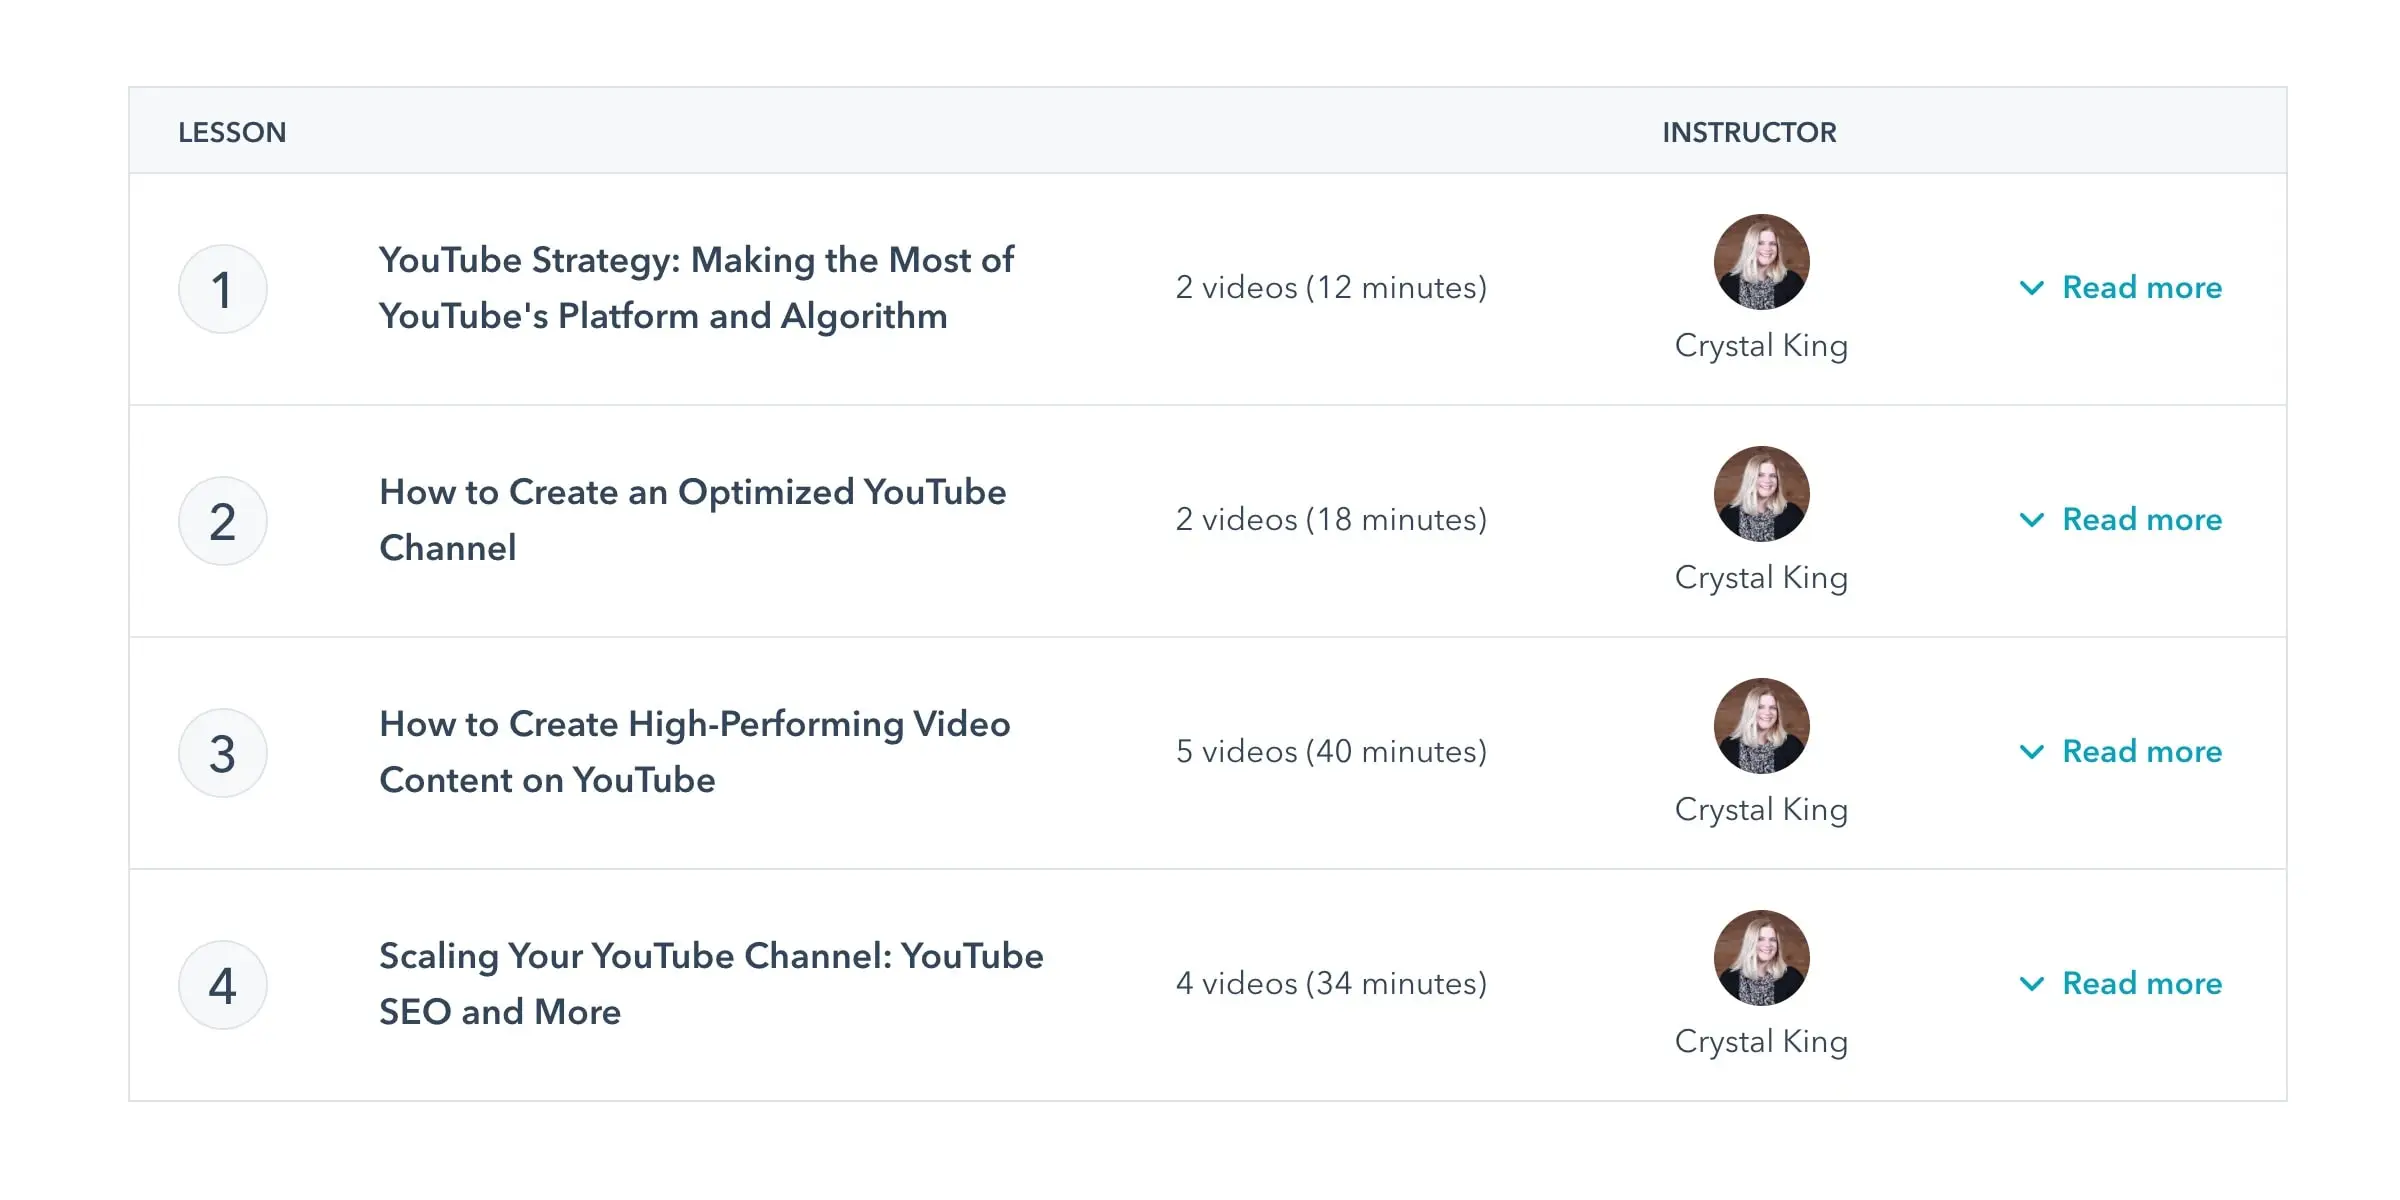 How to Grow a YouTube Channel Course.